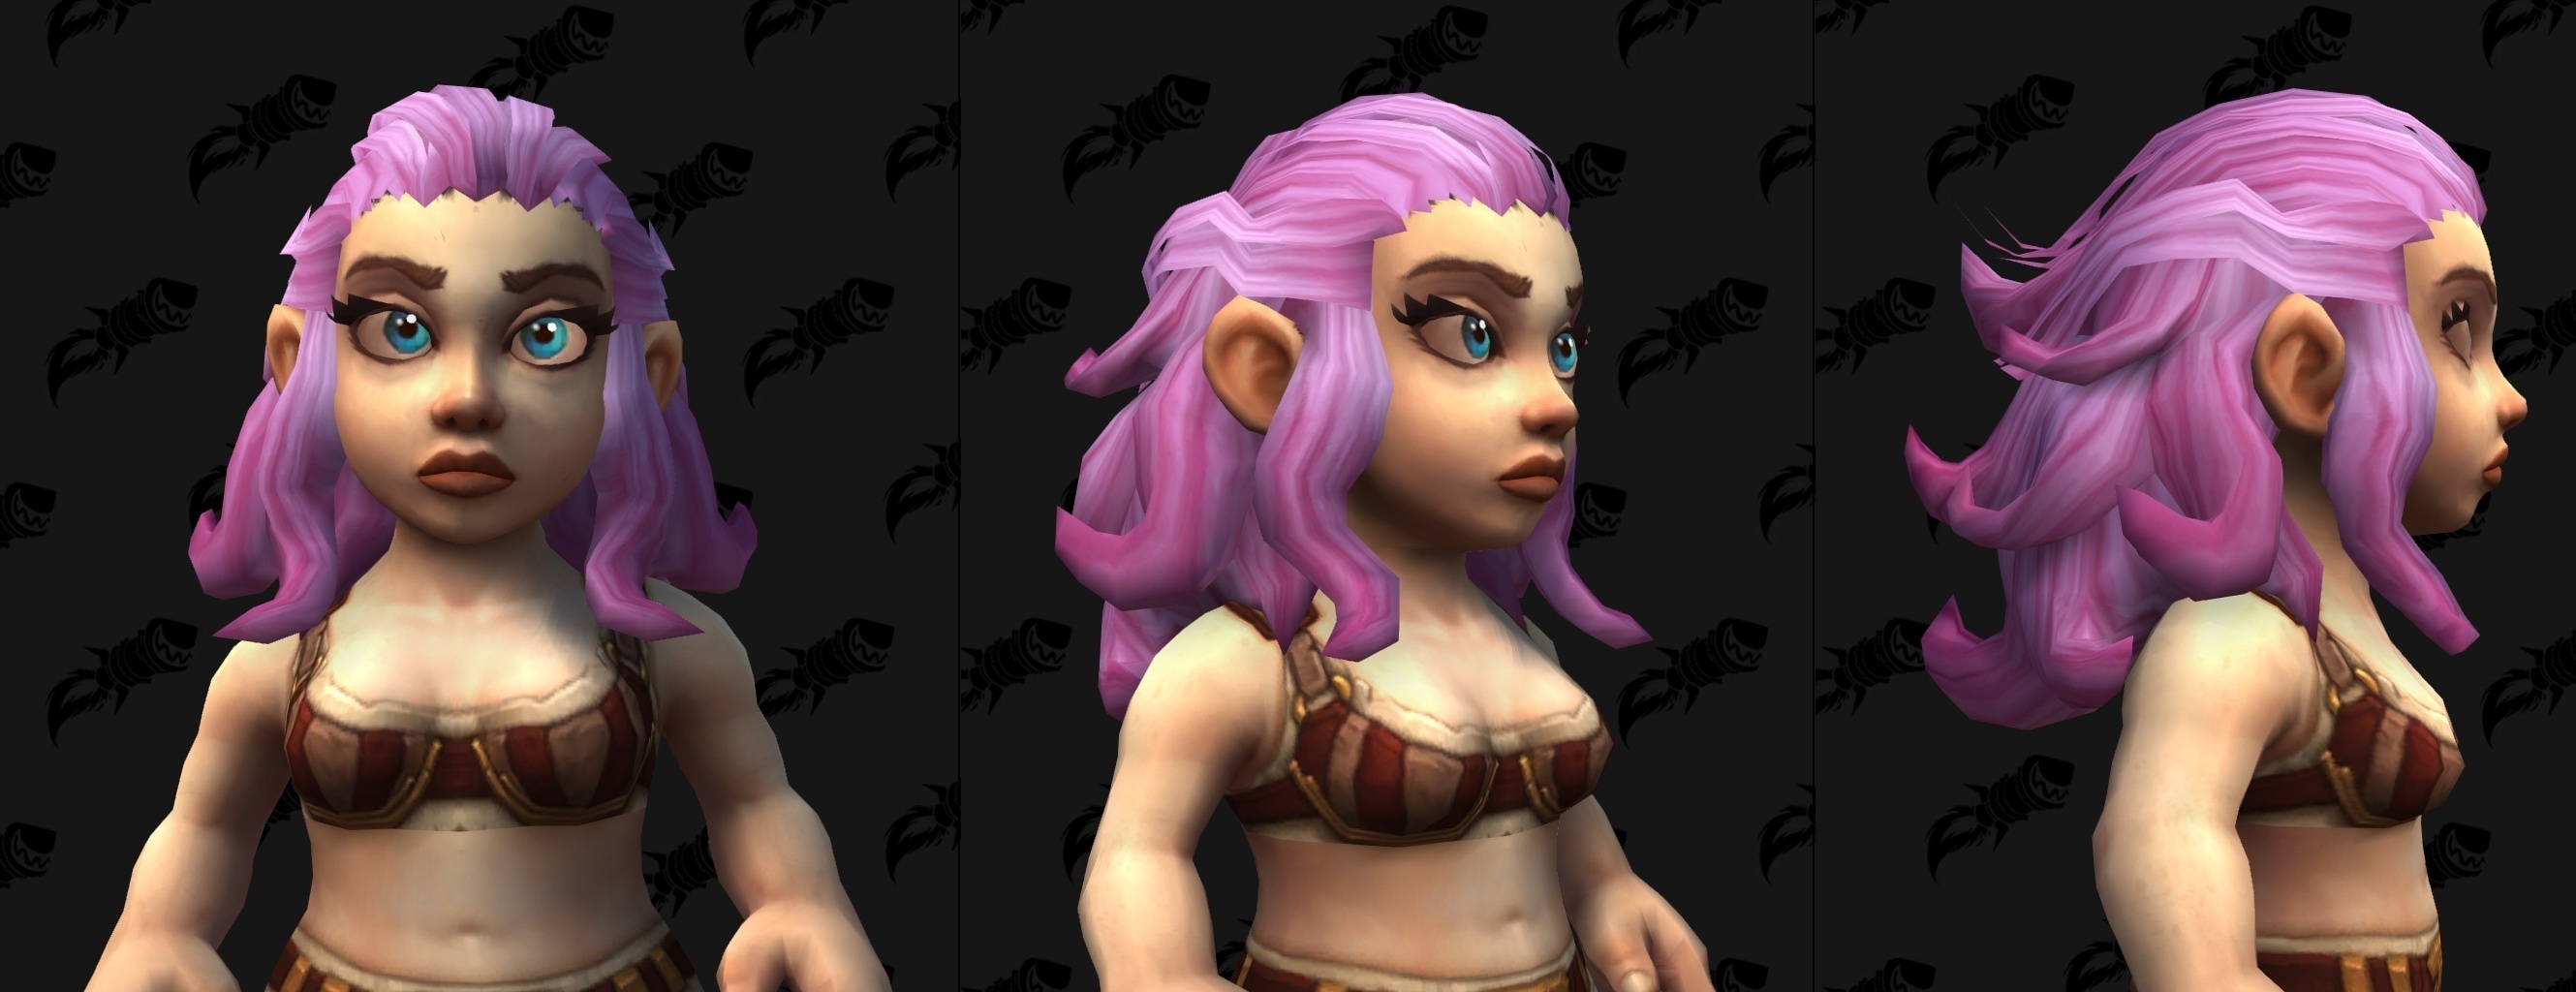 Female gnome characters have received more hairstyle and earring customizat...